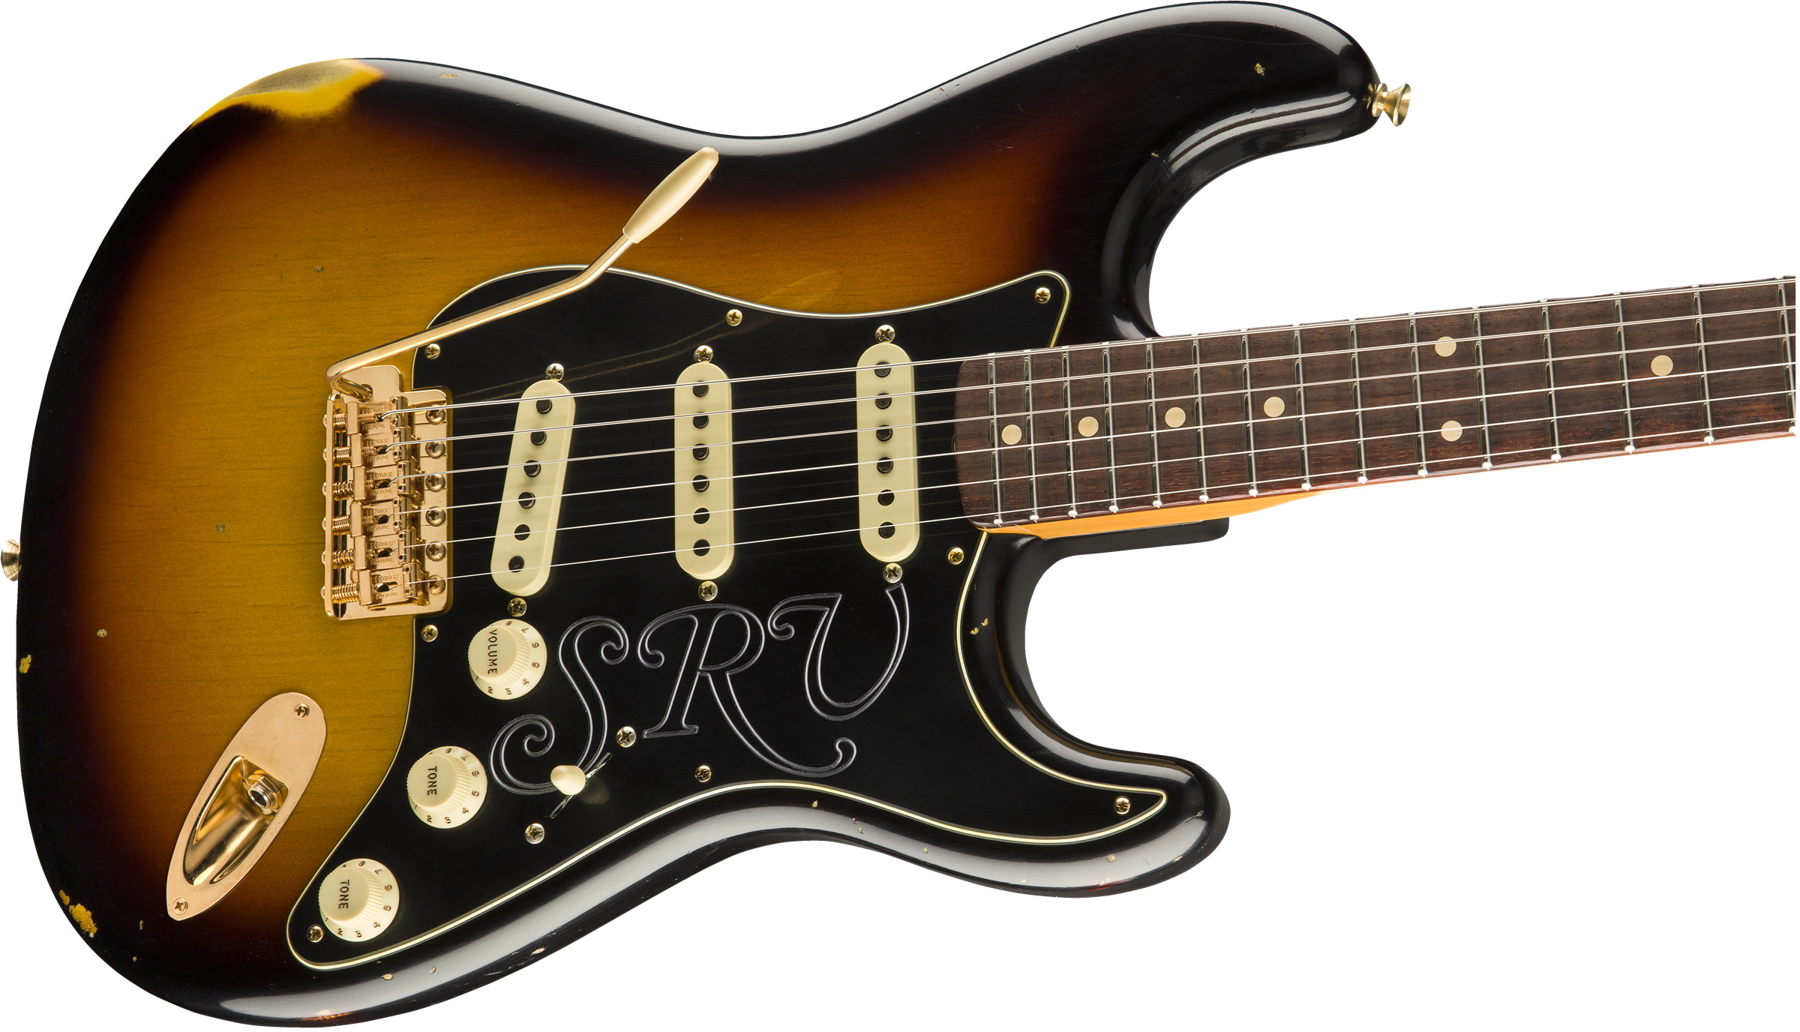 Stevie Ray Vaughan Signature Stratocaster Relic, Rosewood Fingerboard, Faded 3-Color Sunburst追加画像